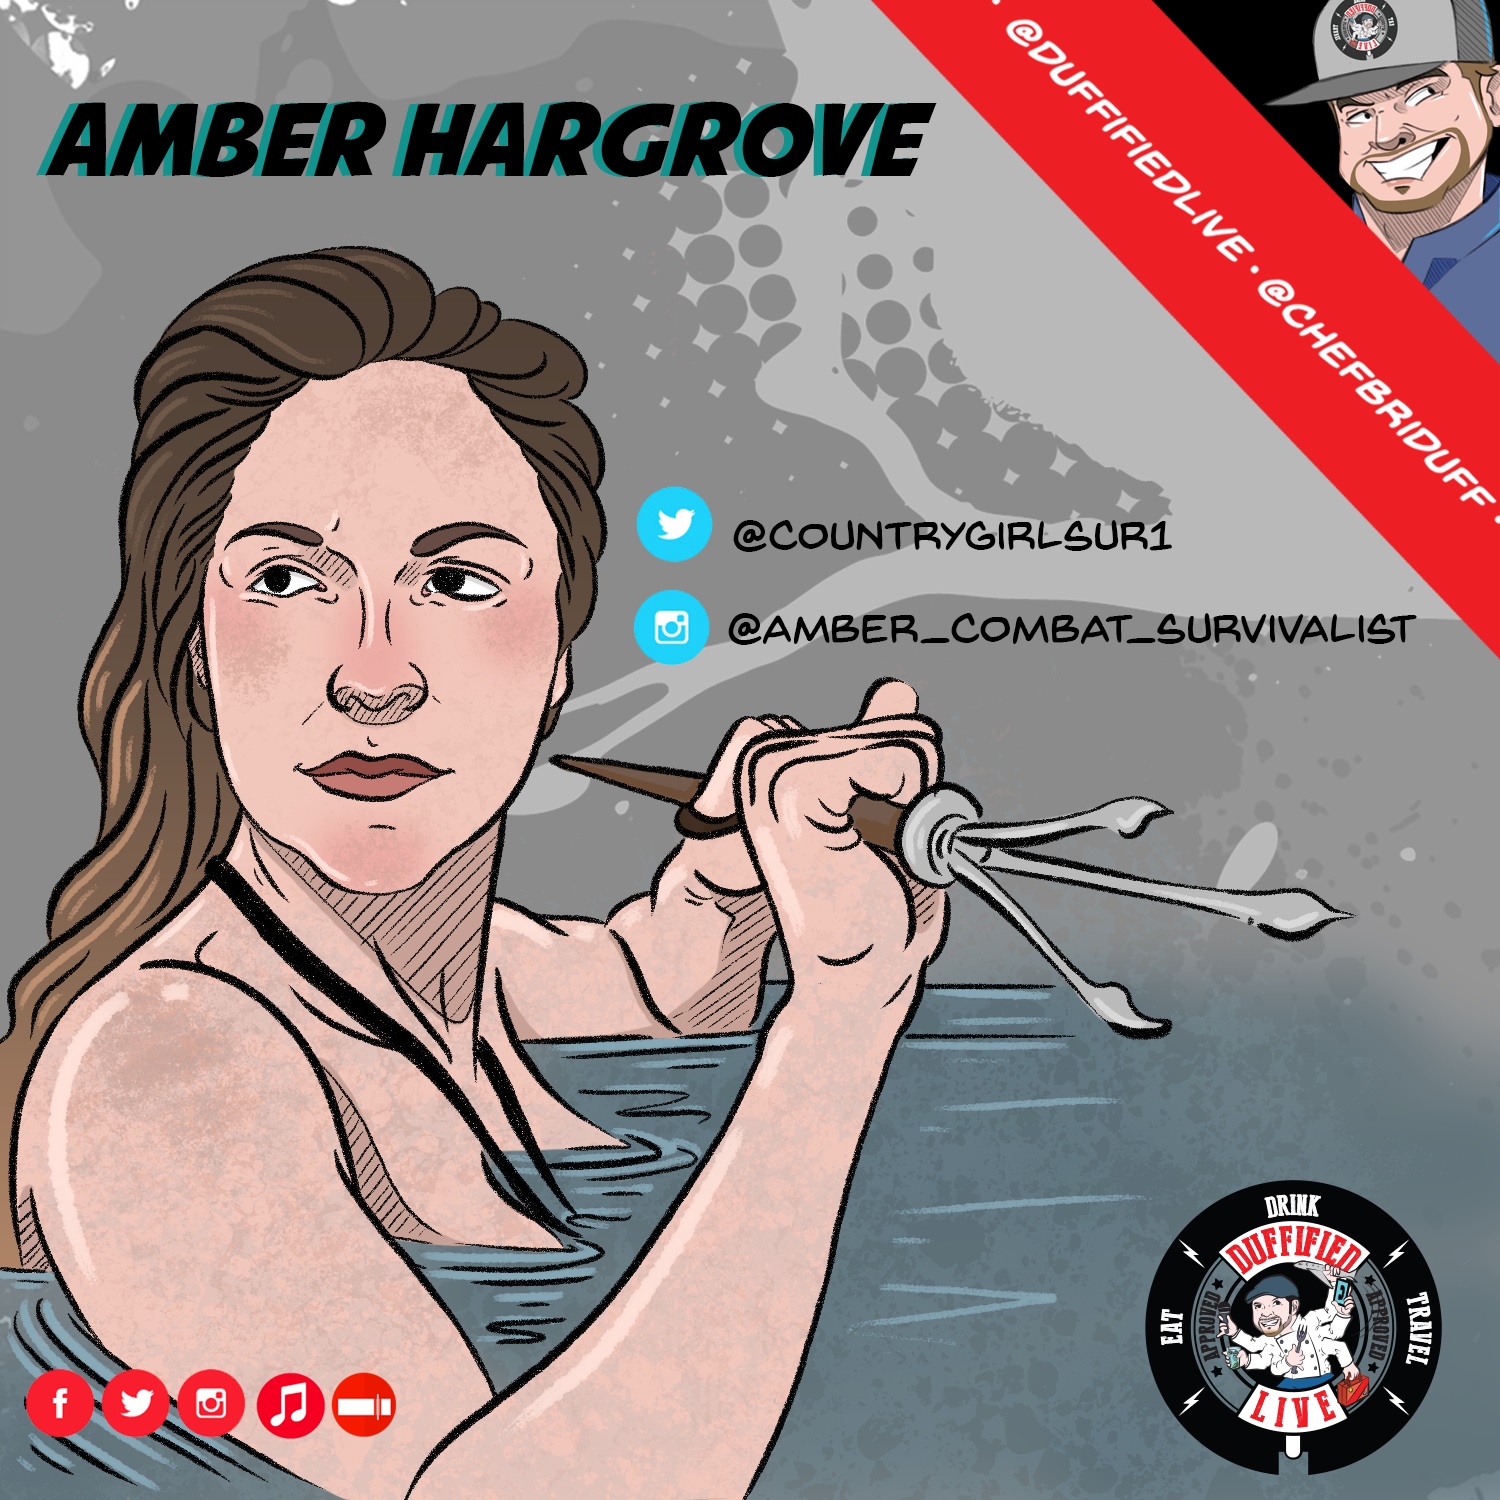 Duffified Live: Amber Hargrove of A&E’s "Naked & Afraid" ...